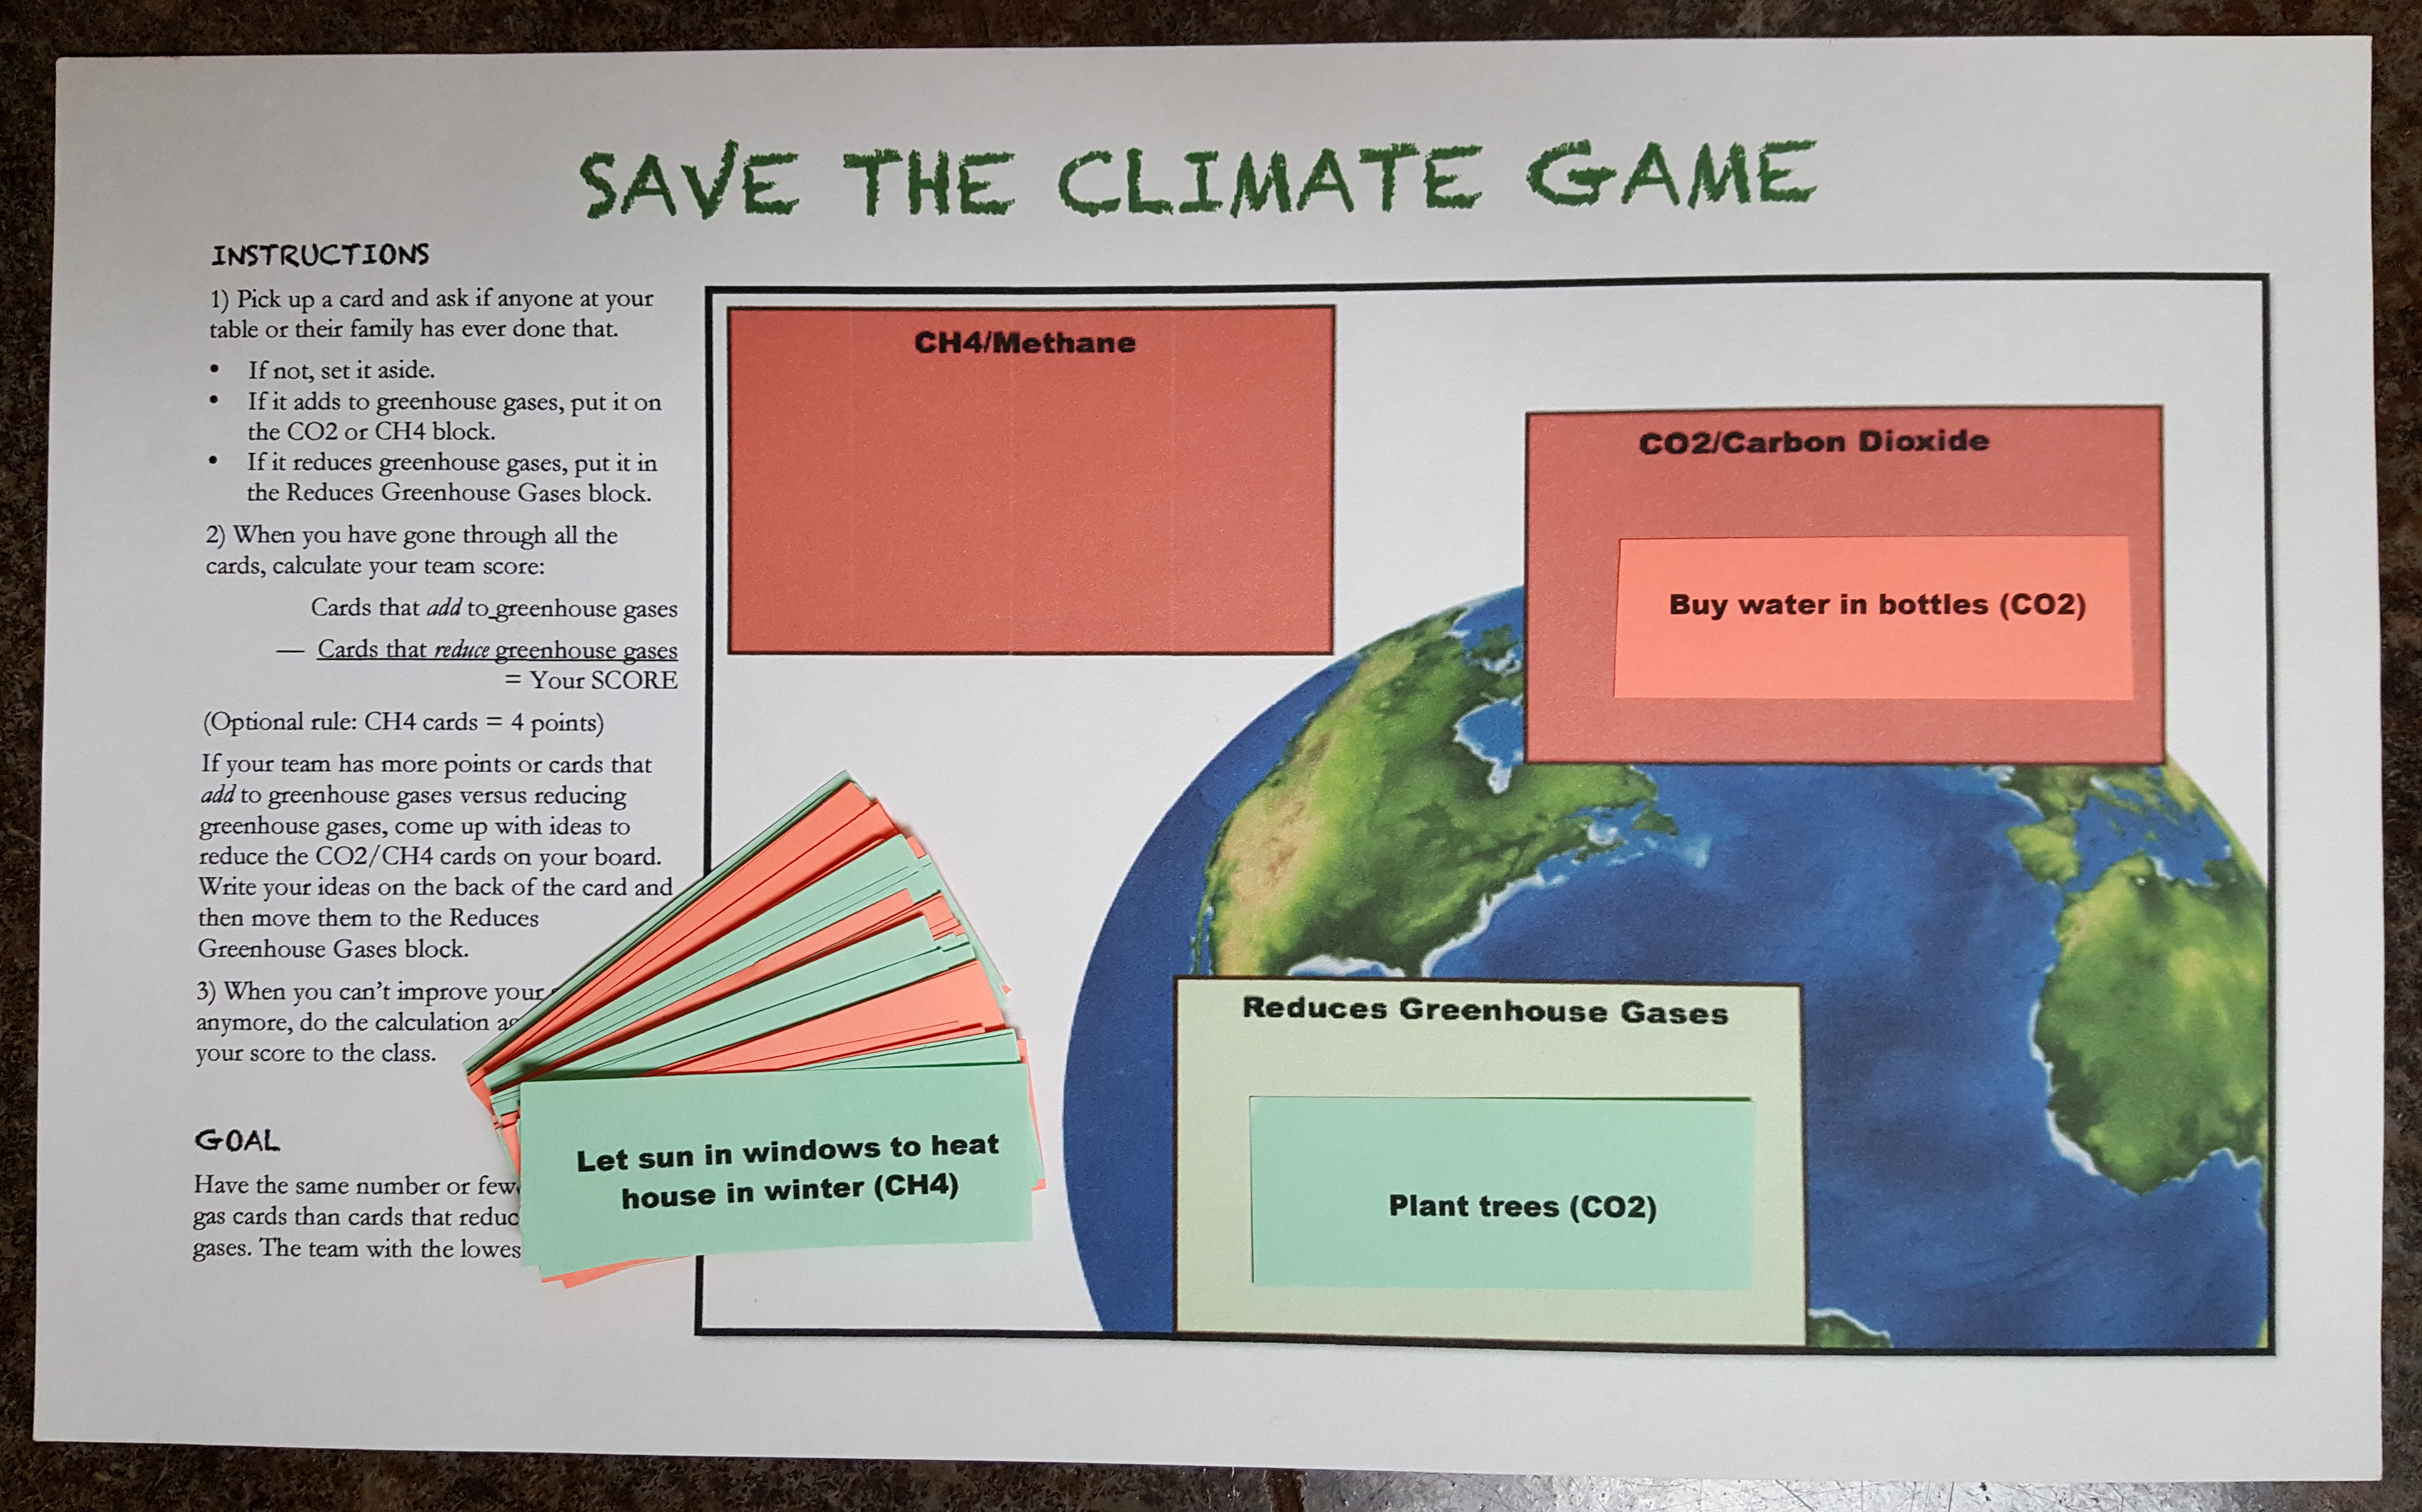 Save the Climate Game